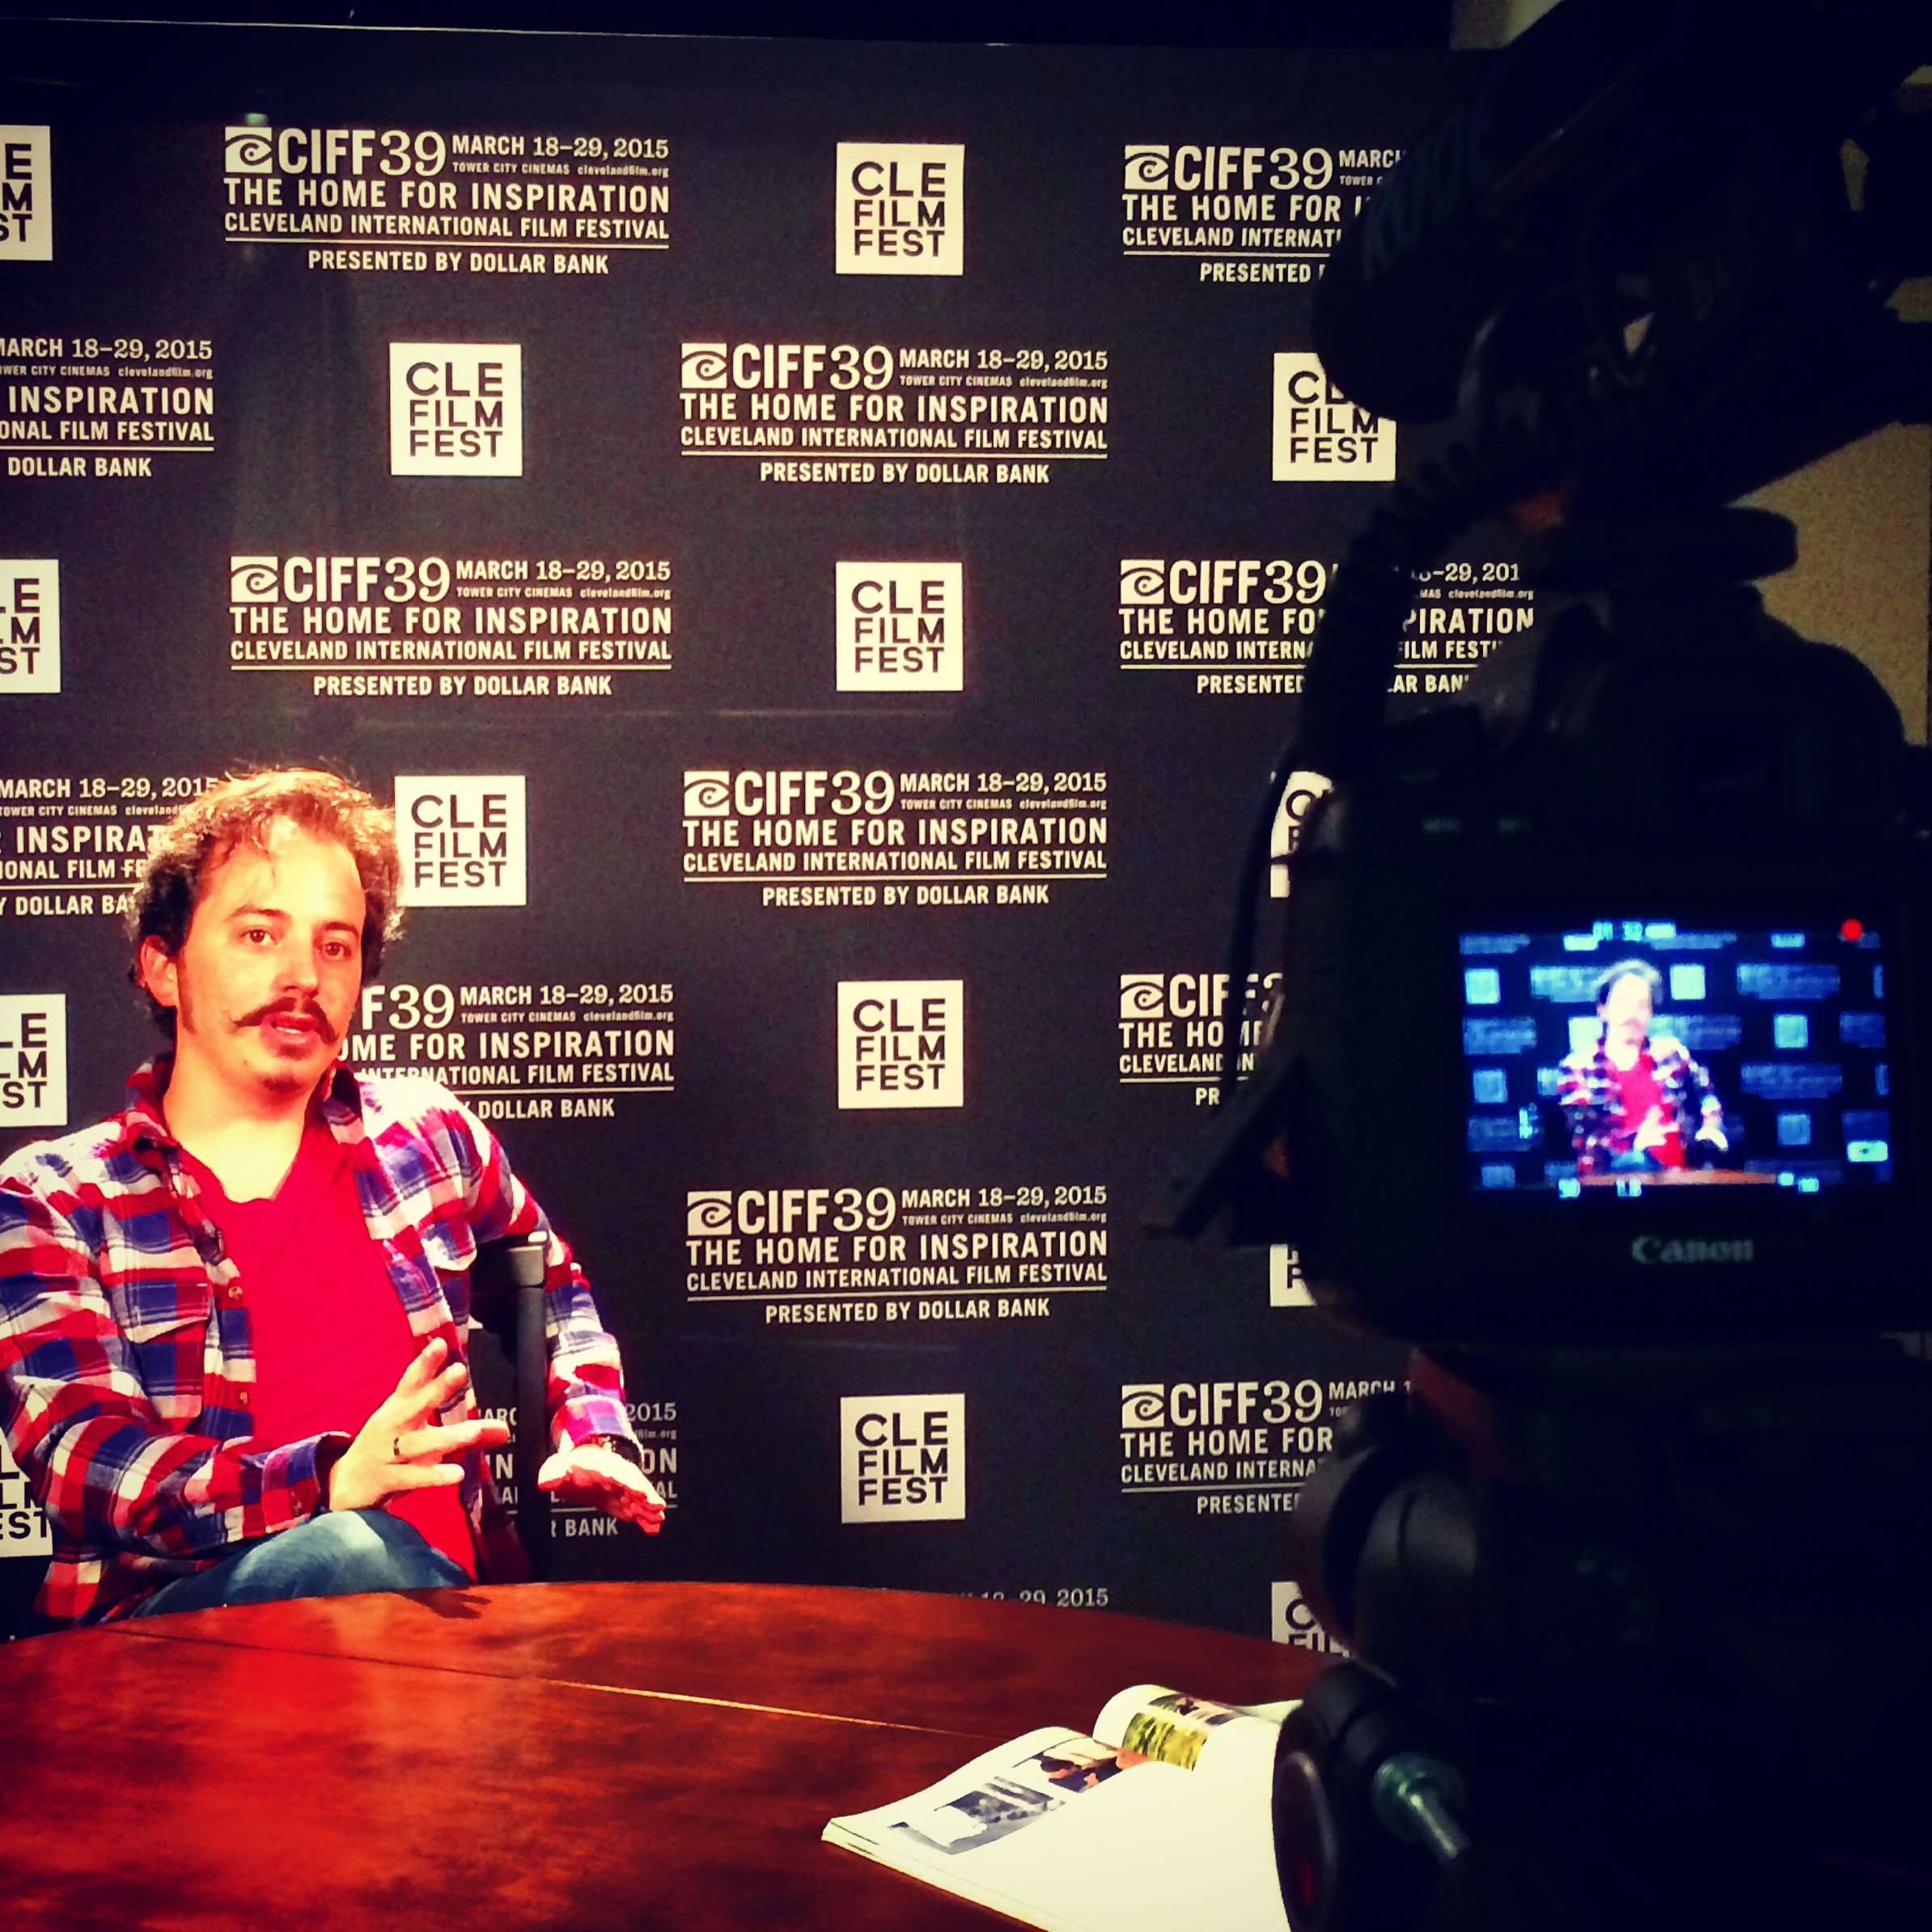 Isaac Ezban on TV interview at the Cleveland International Film Festival, March 2015